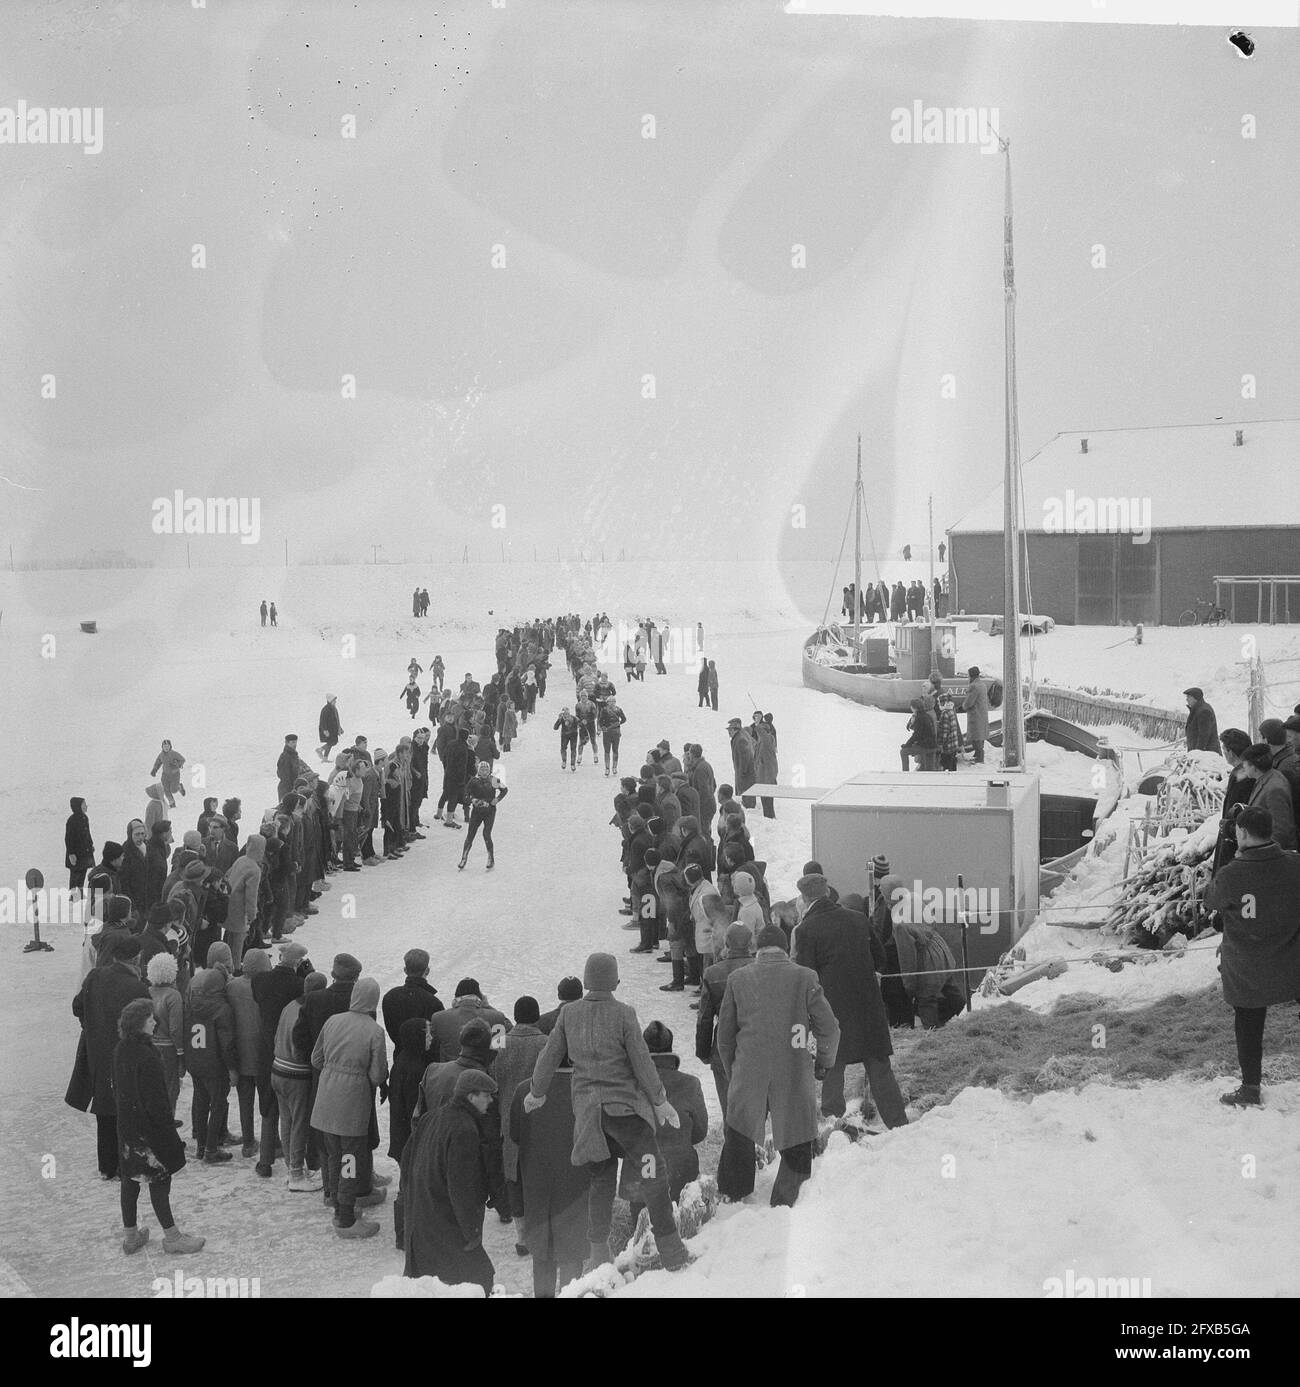 Elfstedentocht 1963. Overview near Workum, from Hindeloopen the participants rode across the IJsselmeer, January 18, 1963, skating, sport, The Netherlands, 20th century press agency photo, news to remember, documentary, historic photography 1945-1990, visual stories, human history of the Twentieth Century, capturing moments in time Stock Photo